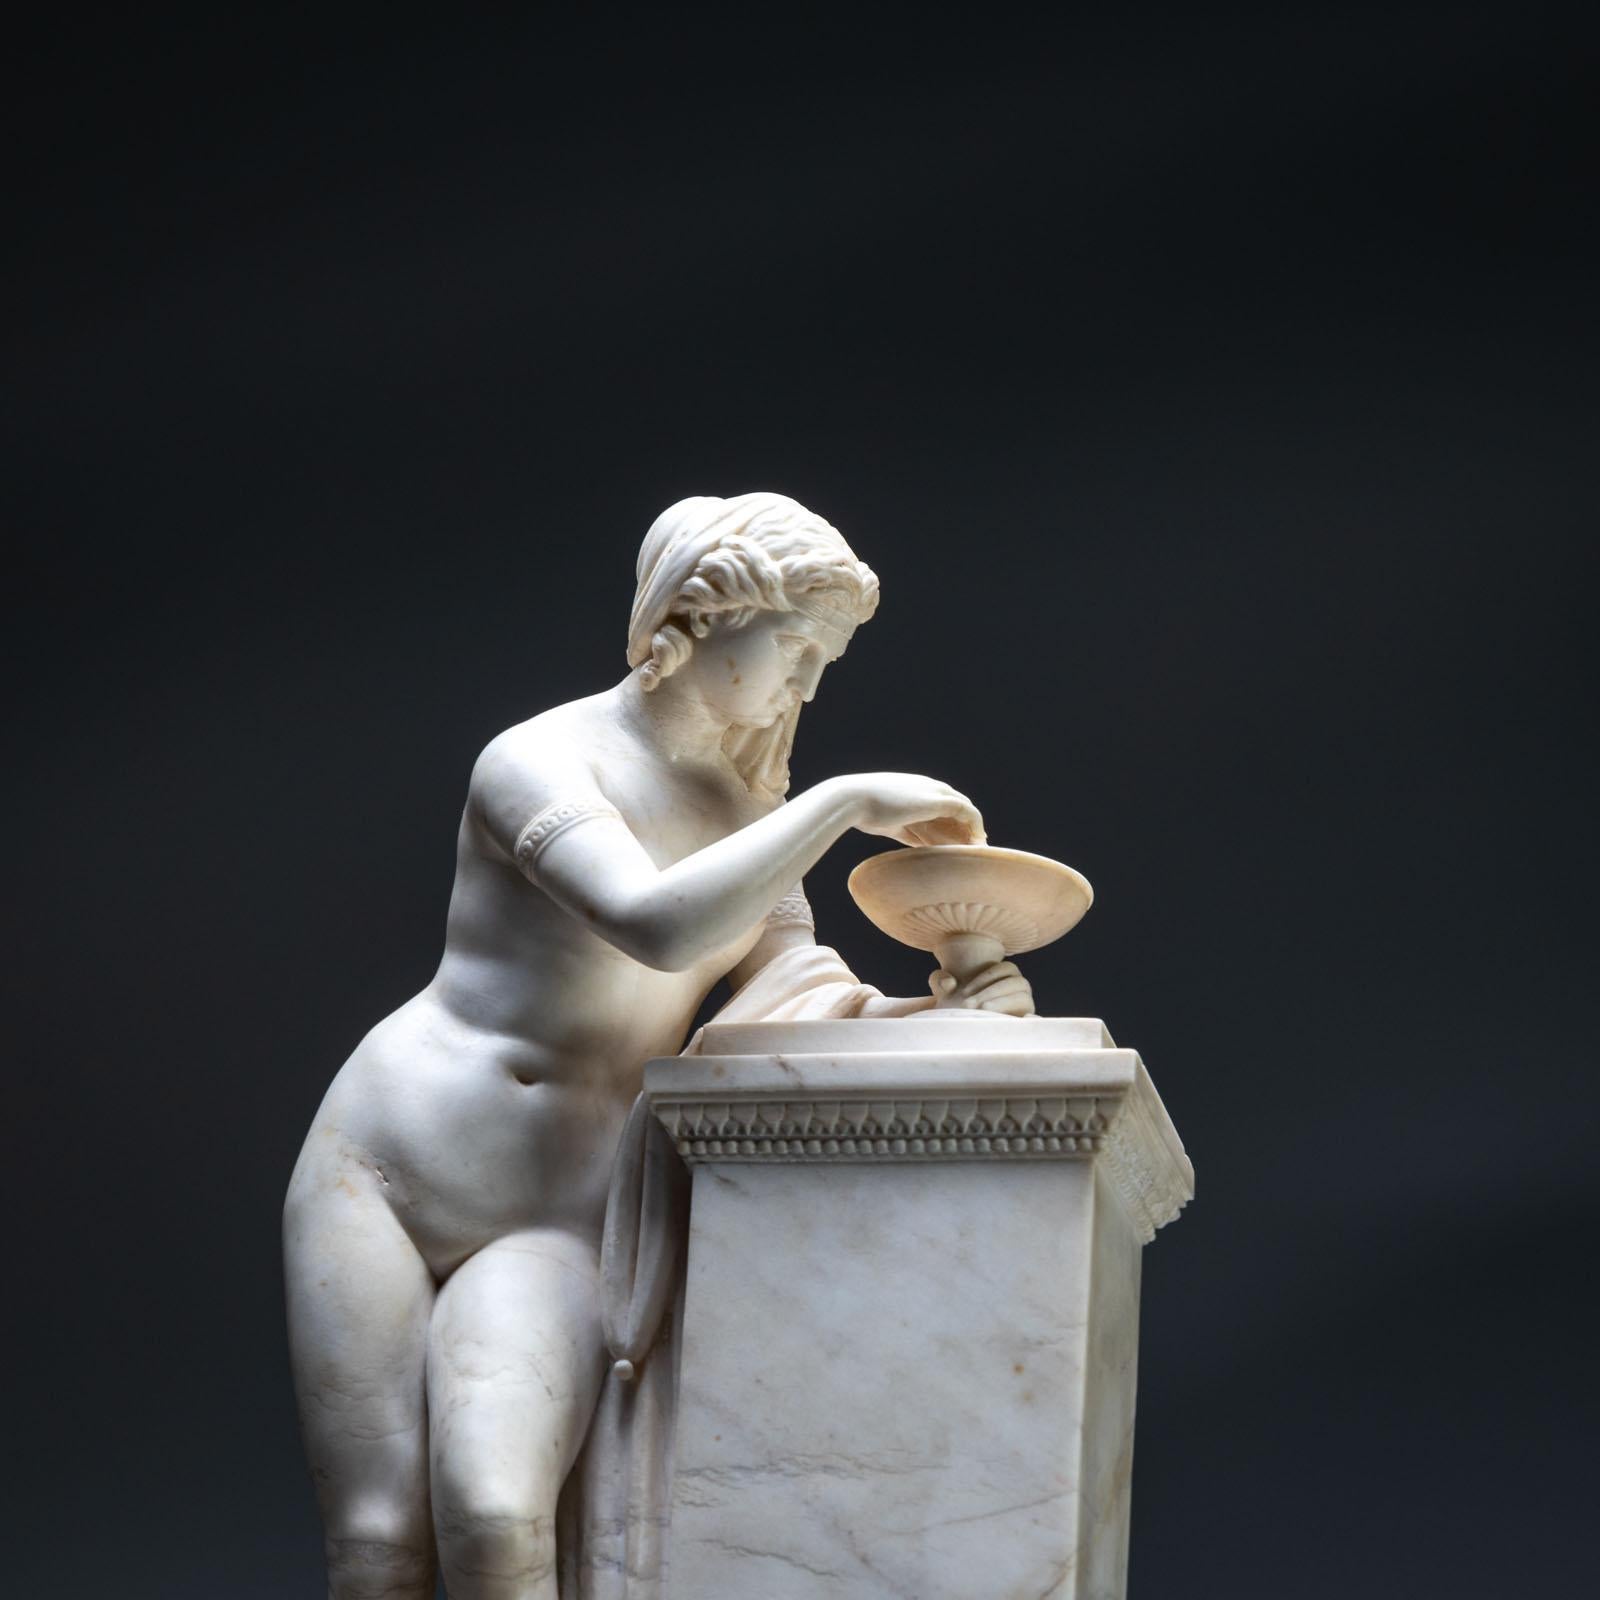 Marble sculpture, probably depicting an undressed nymph with curly hair and bracelets around her upper arms. She is leaning against a pillar and disturbing the surface of the water in the tazza with a staff. The effect of the ripples on the surface